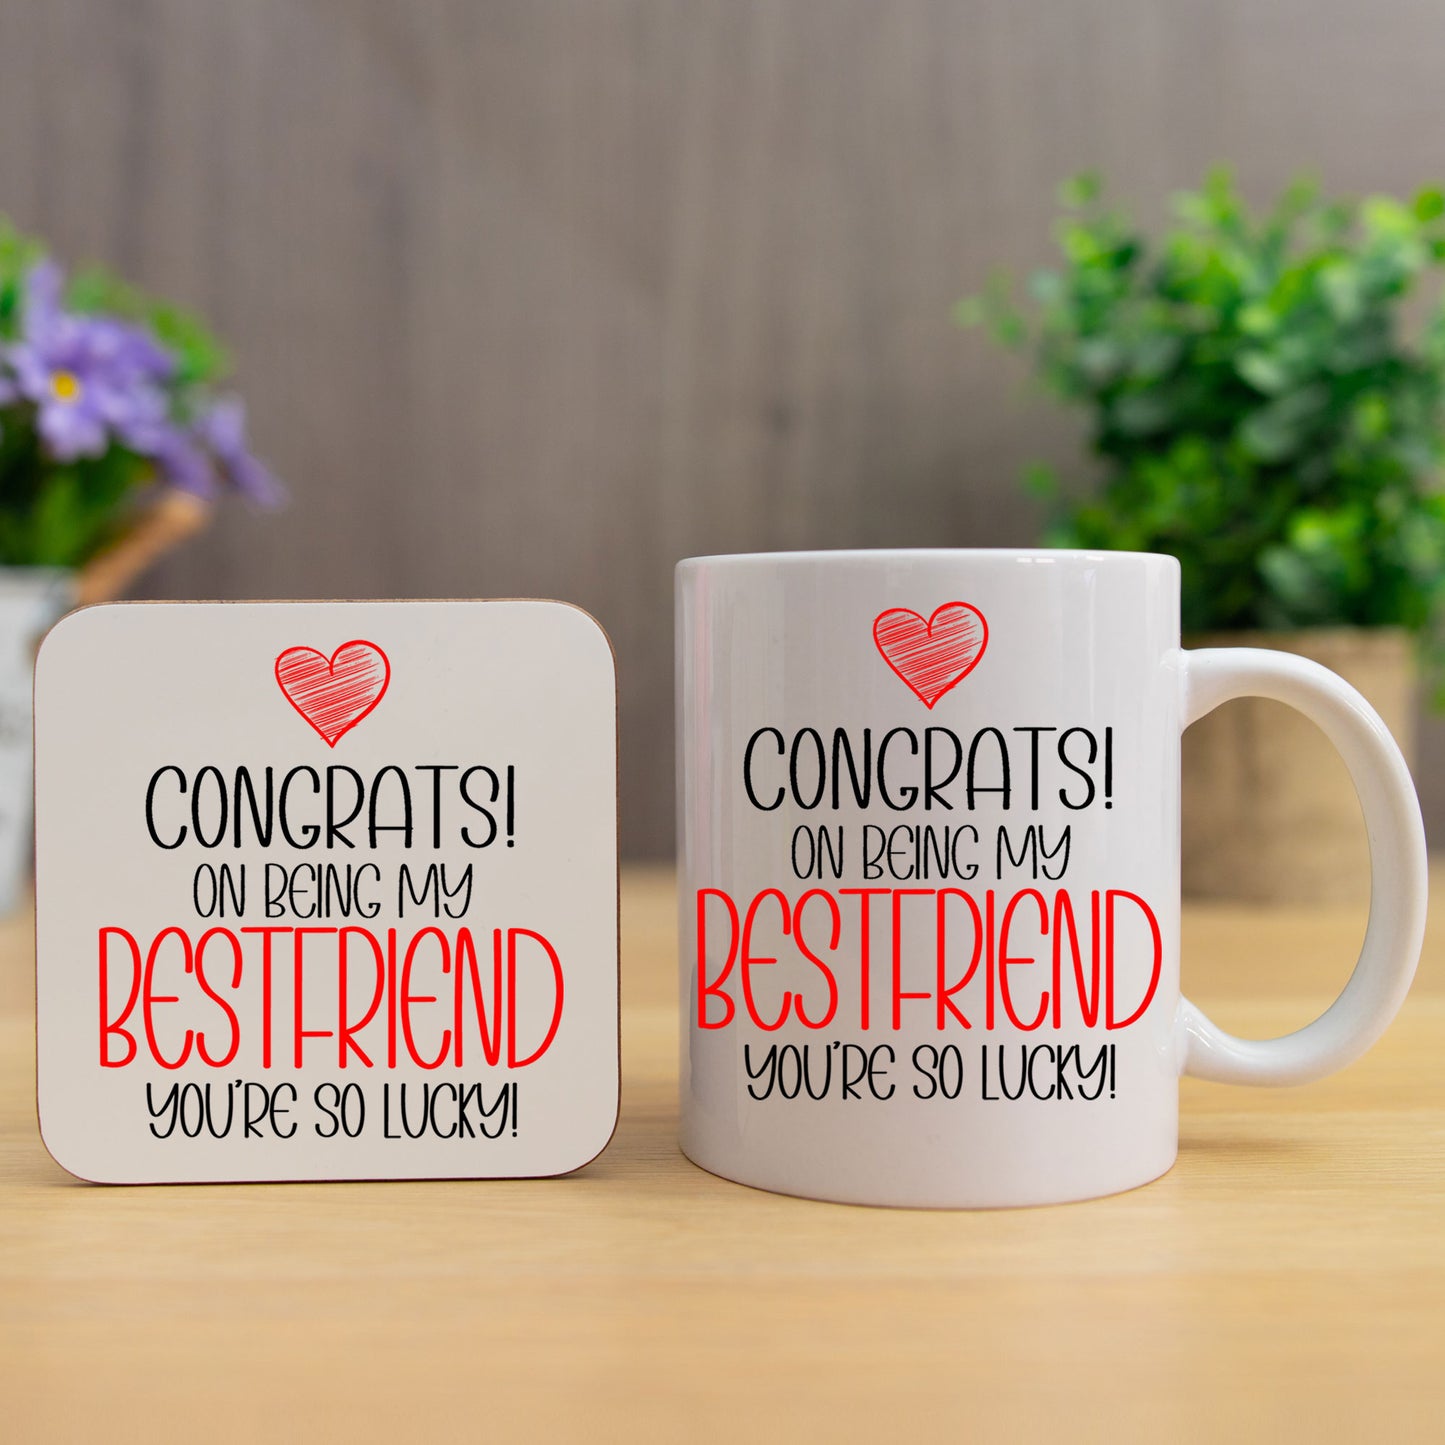 Congrats On Being My Best Friend Mug and/or Coaster Gift  - Always Looking Good - So Lucky Mug & Coaster Set  